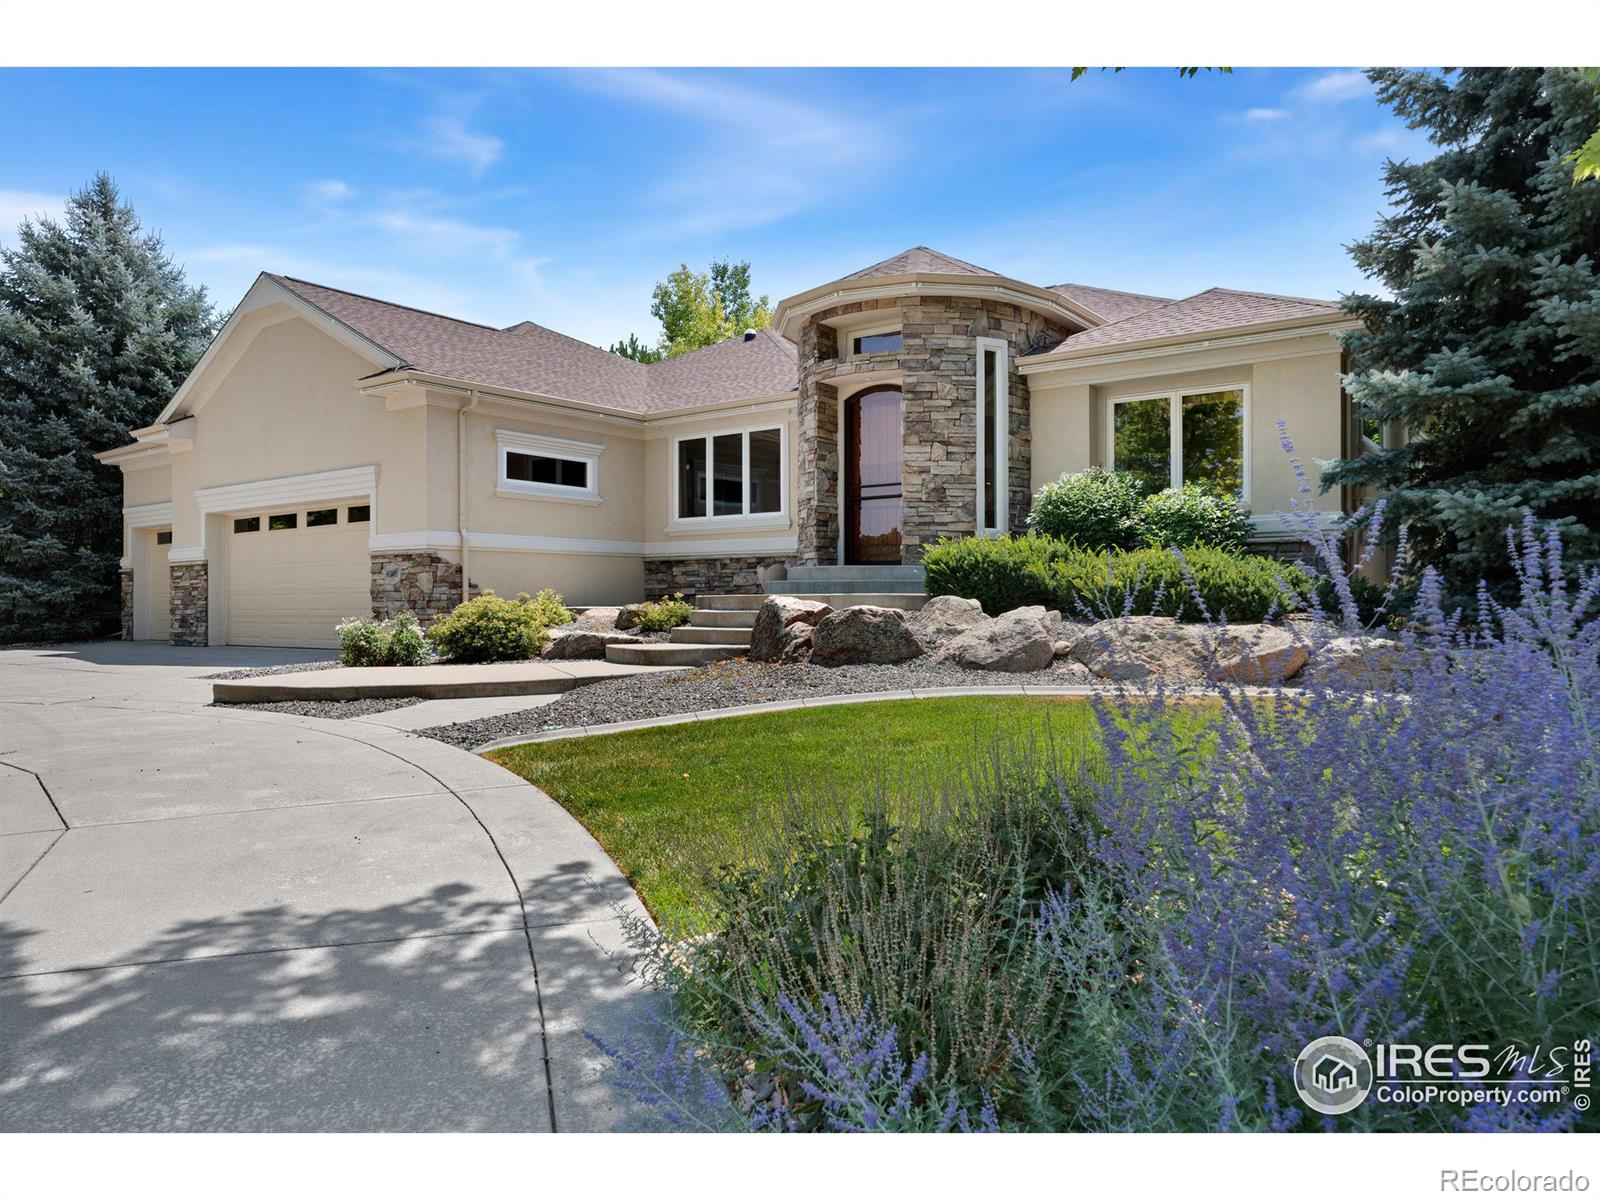 6502 E Trilby Road, fort collins MLS: 4567891015147 Beds: 5 Baths: 3 Price: $1,325,000